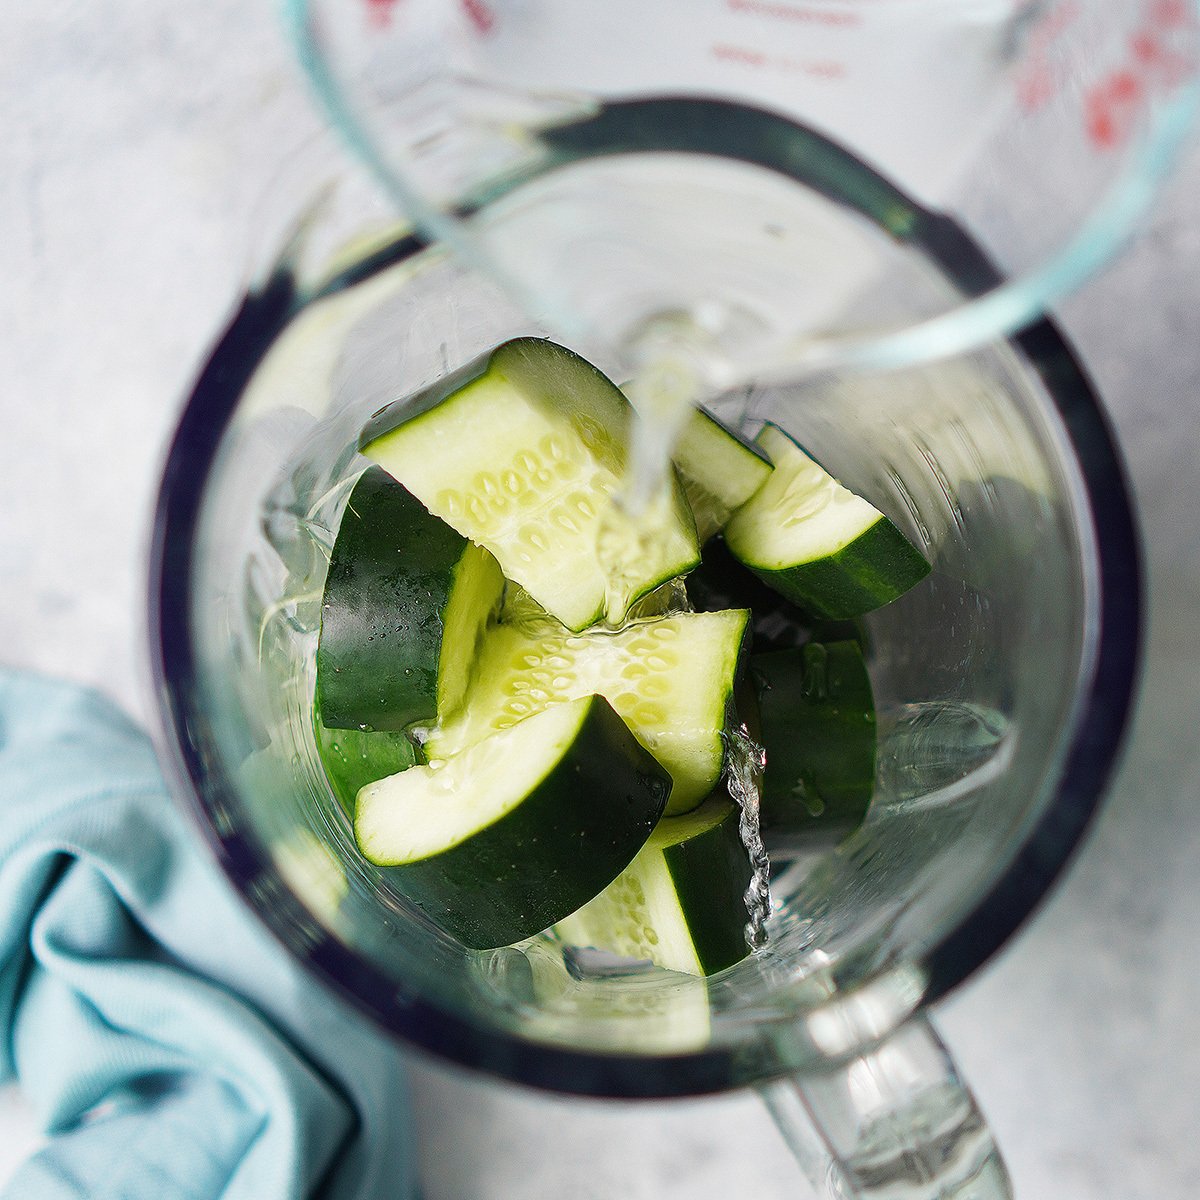 Cucumber slices in a blender glass with water being poured over it.